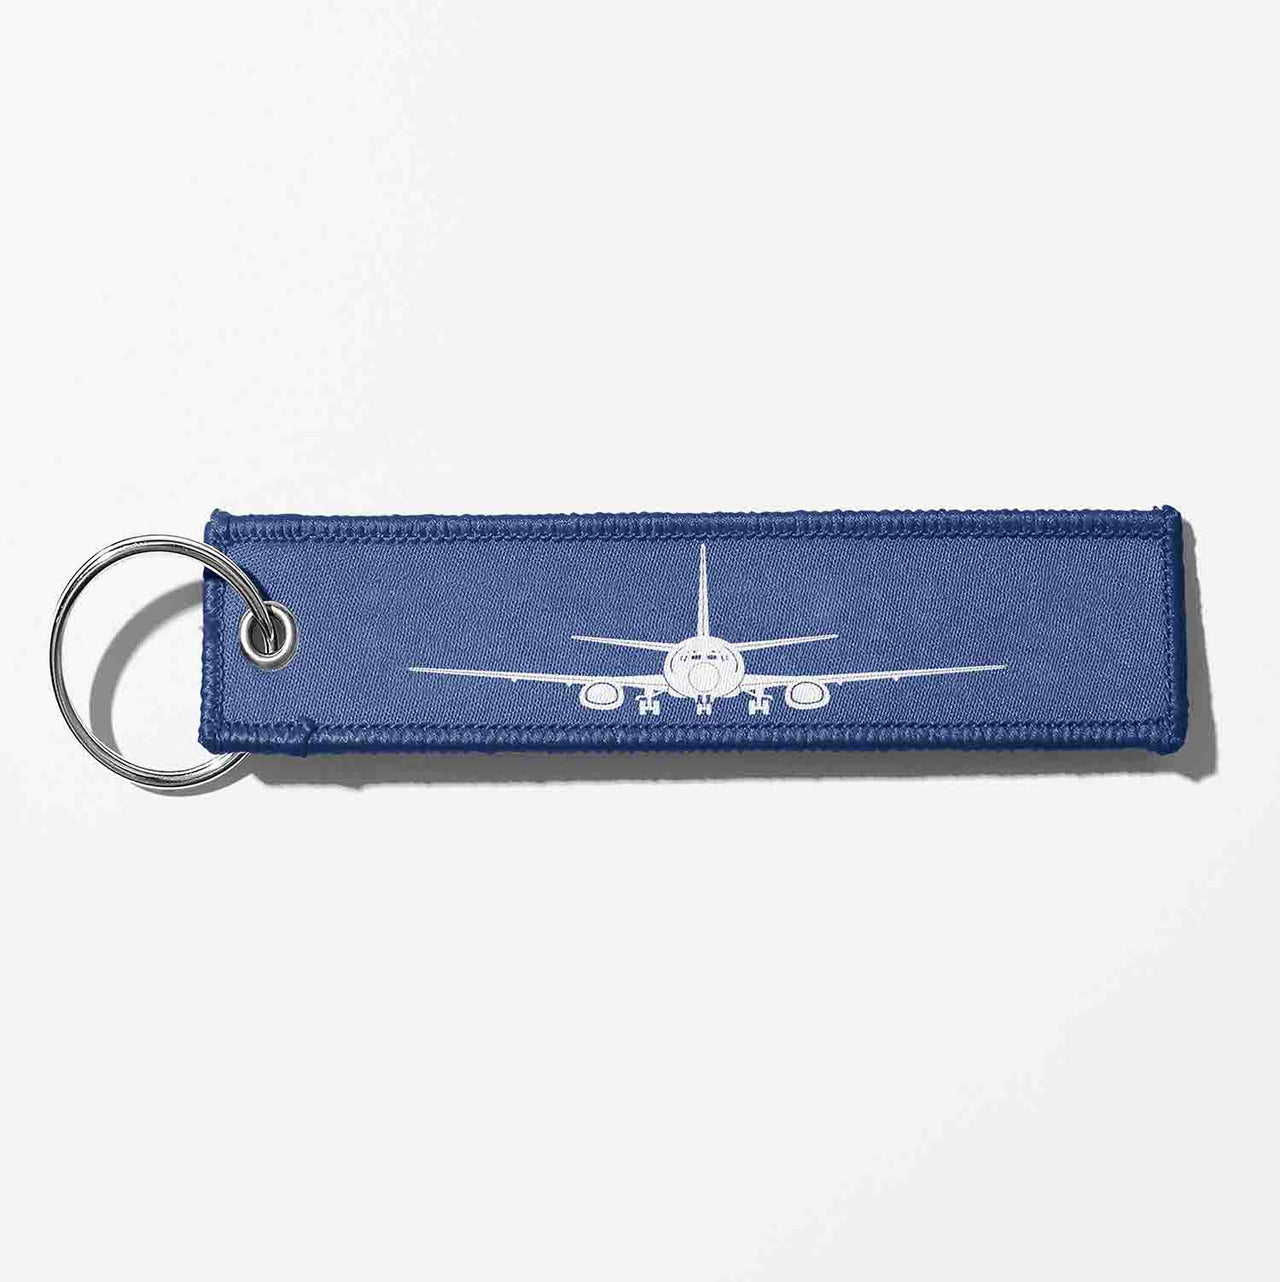 Boeing 737 Silhouette Designed Key Chains